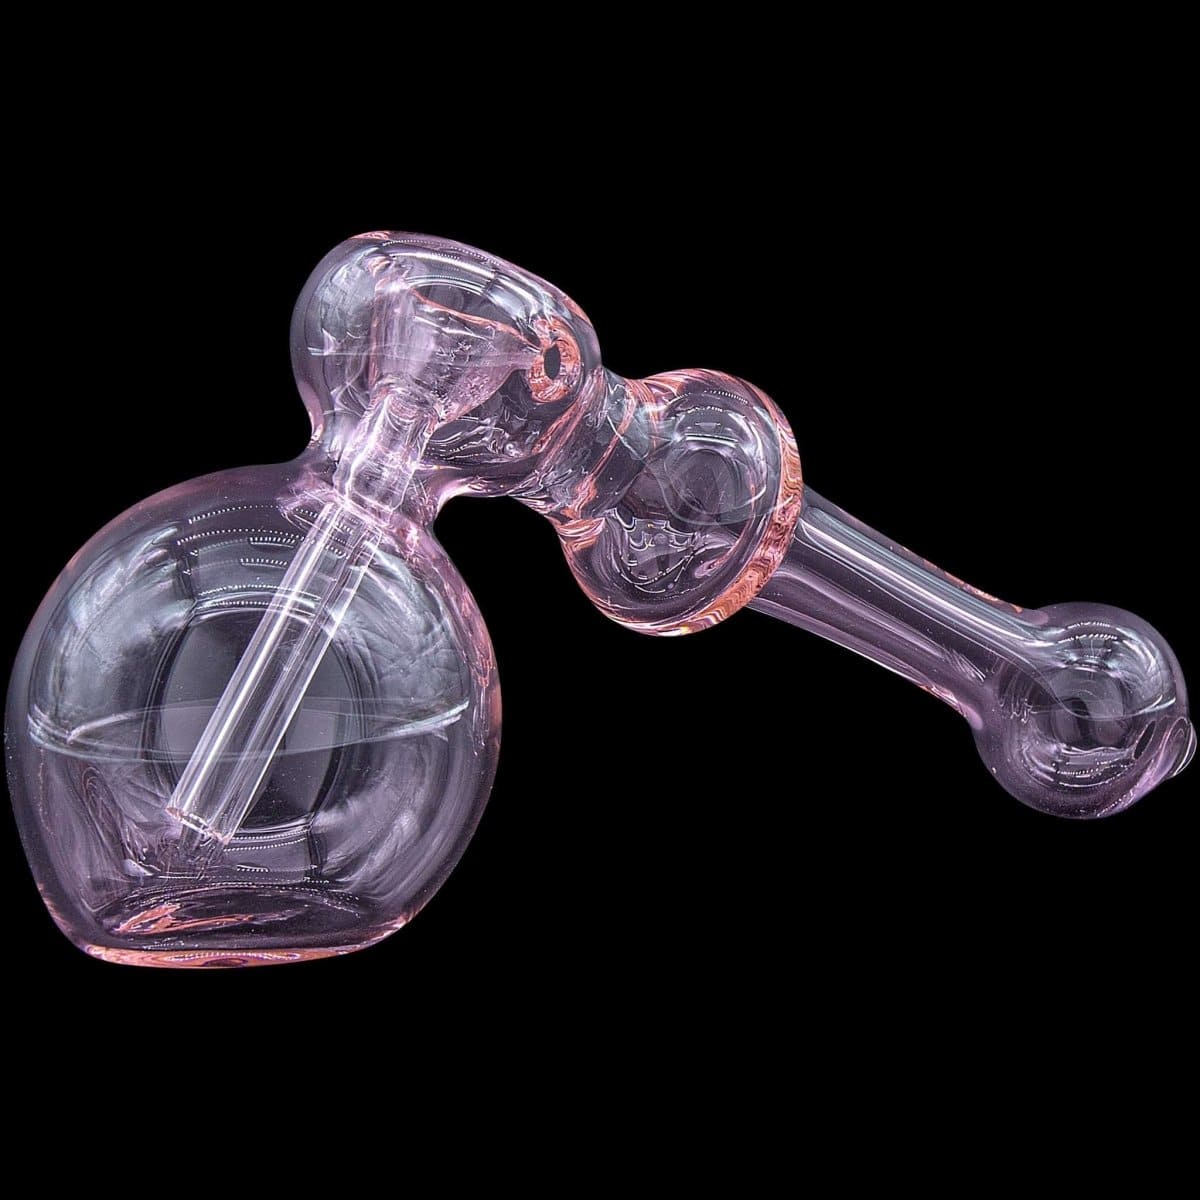 LA Pipes Bubbler Translucent Pink "Glass Hammer" Glass Hammer Bubbler Pipe (Various Colors)